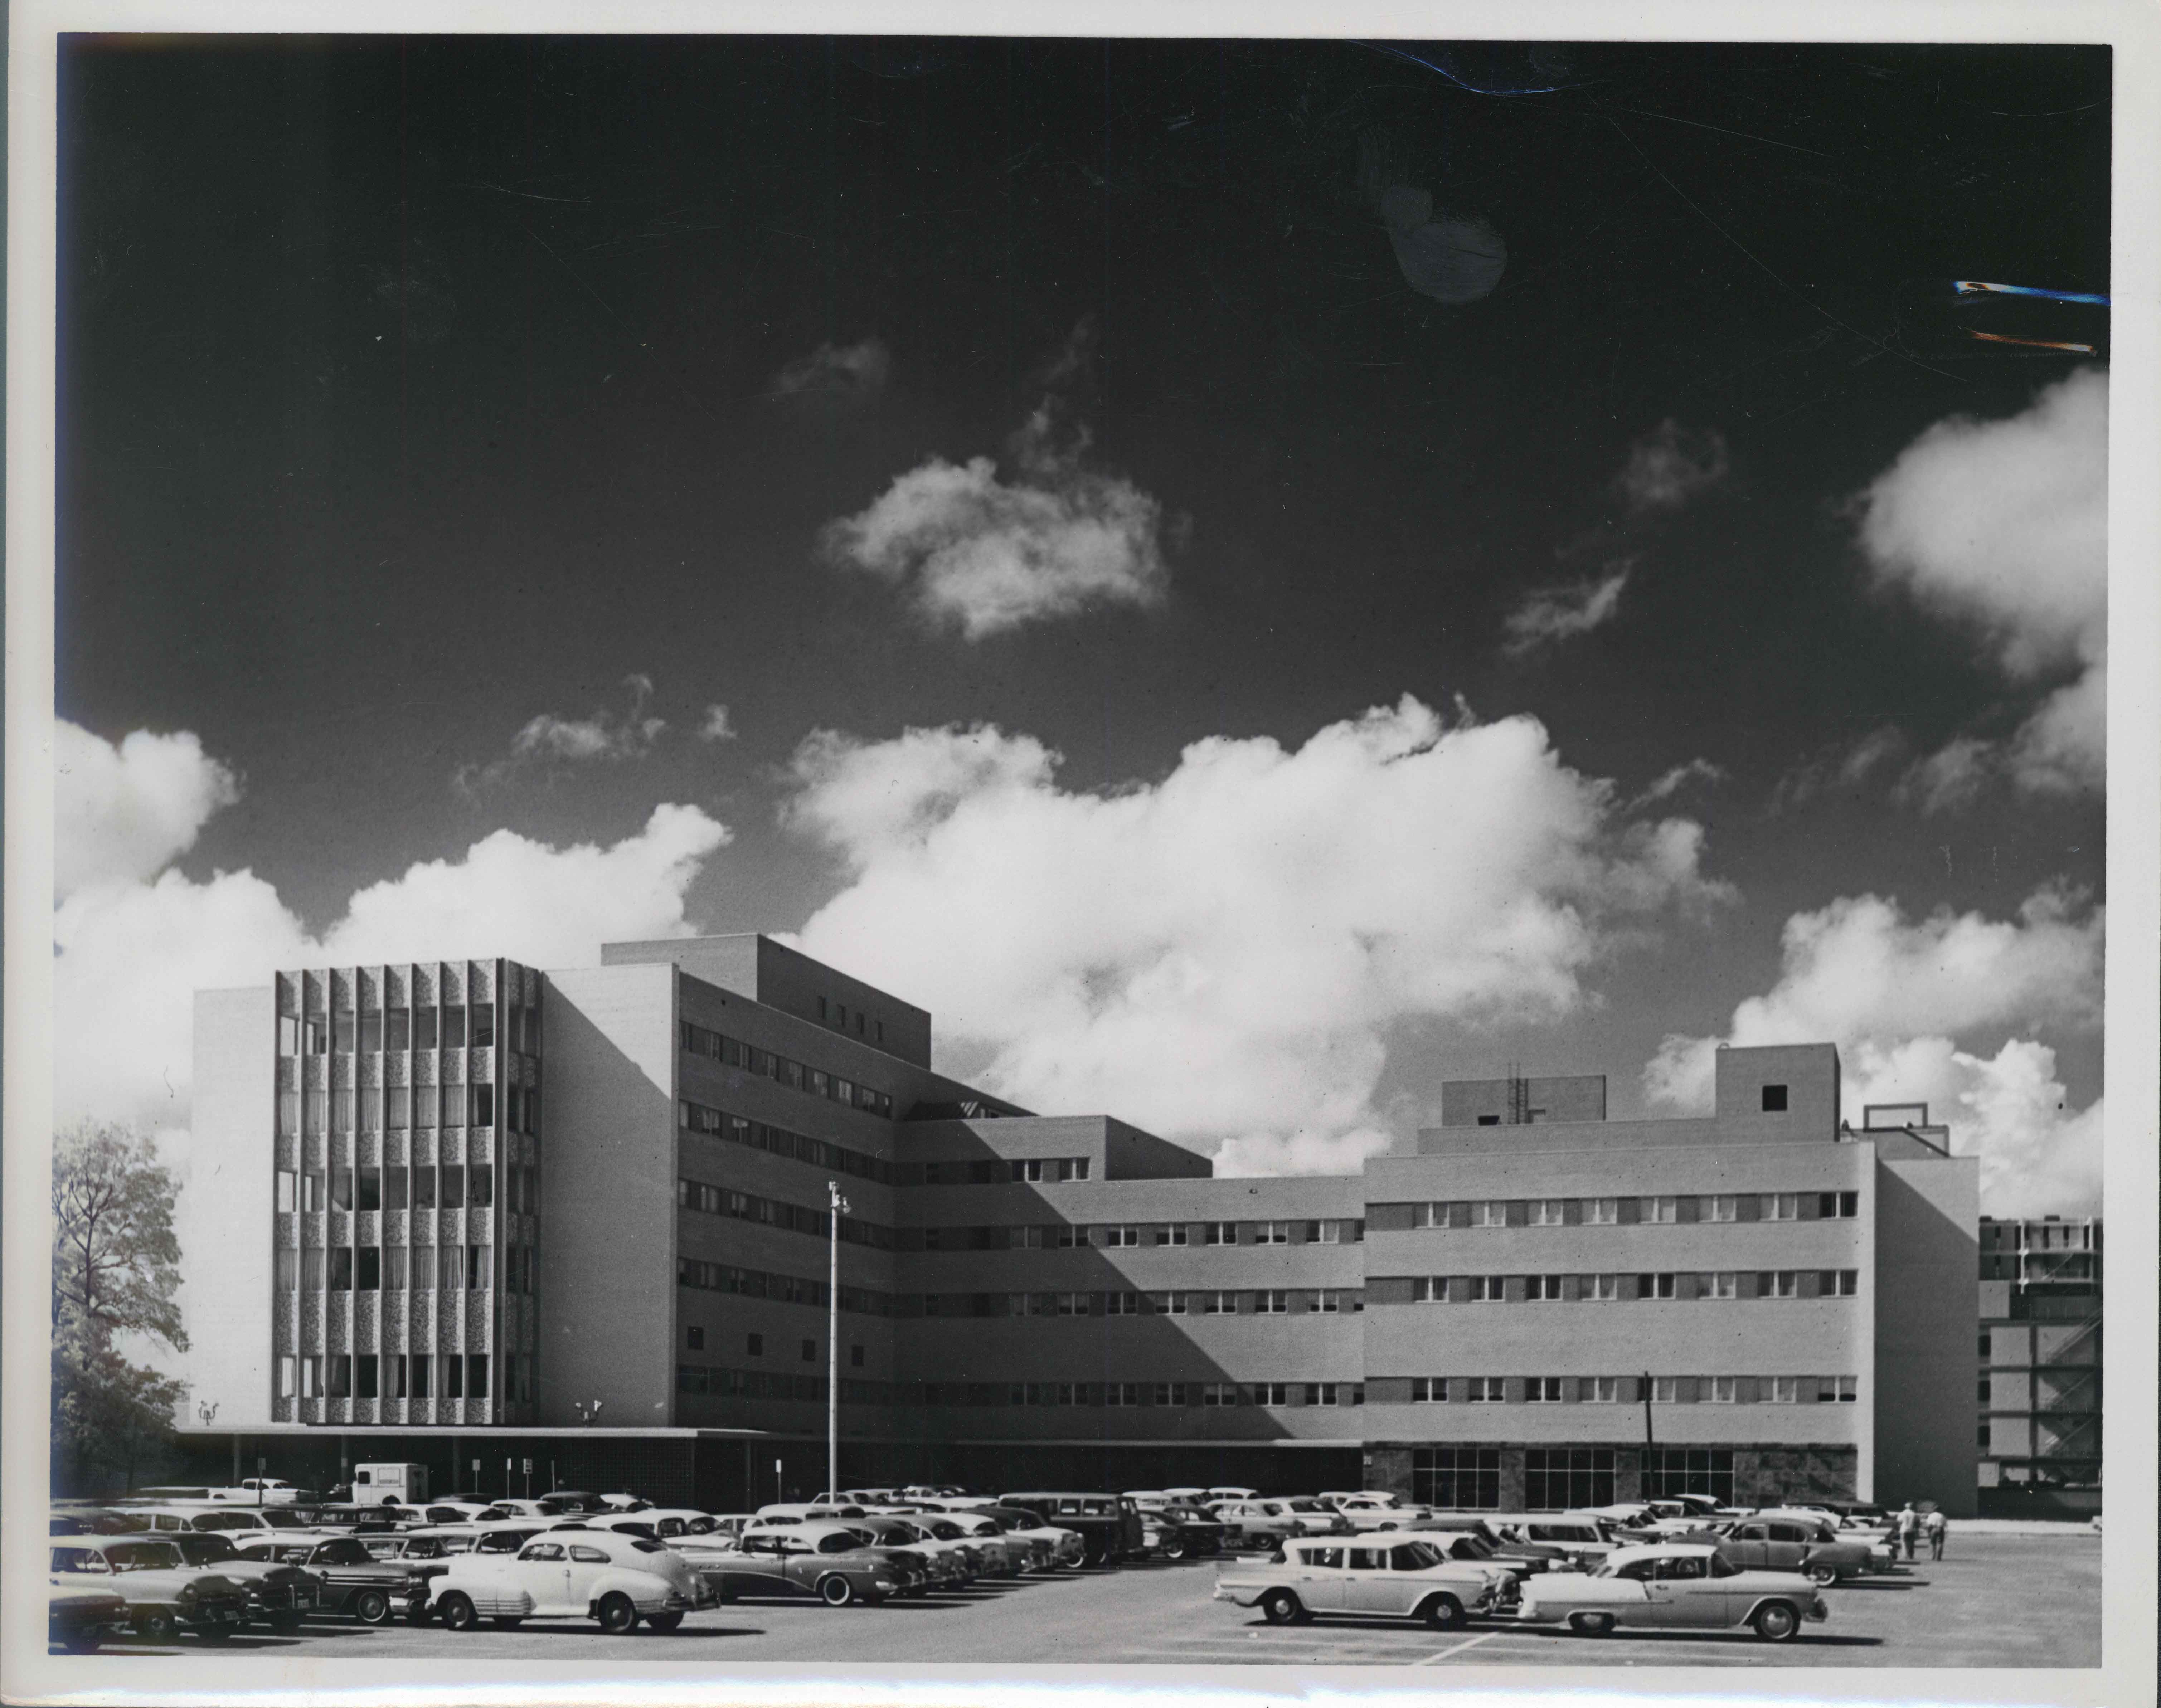 Ben Taub hospital in the early 1960's.